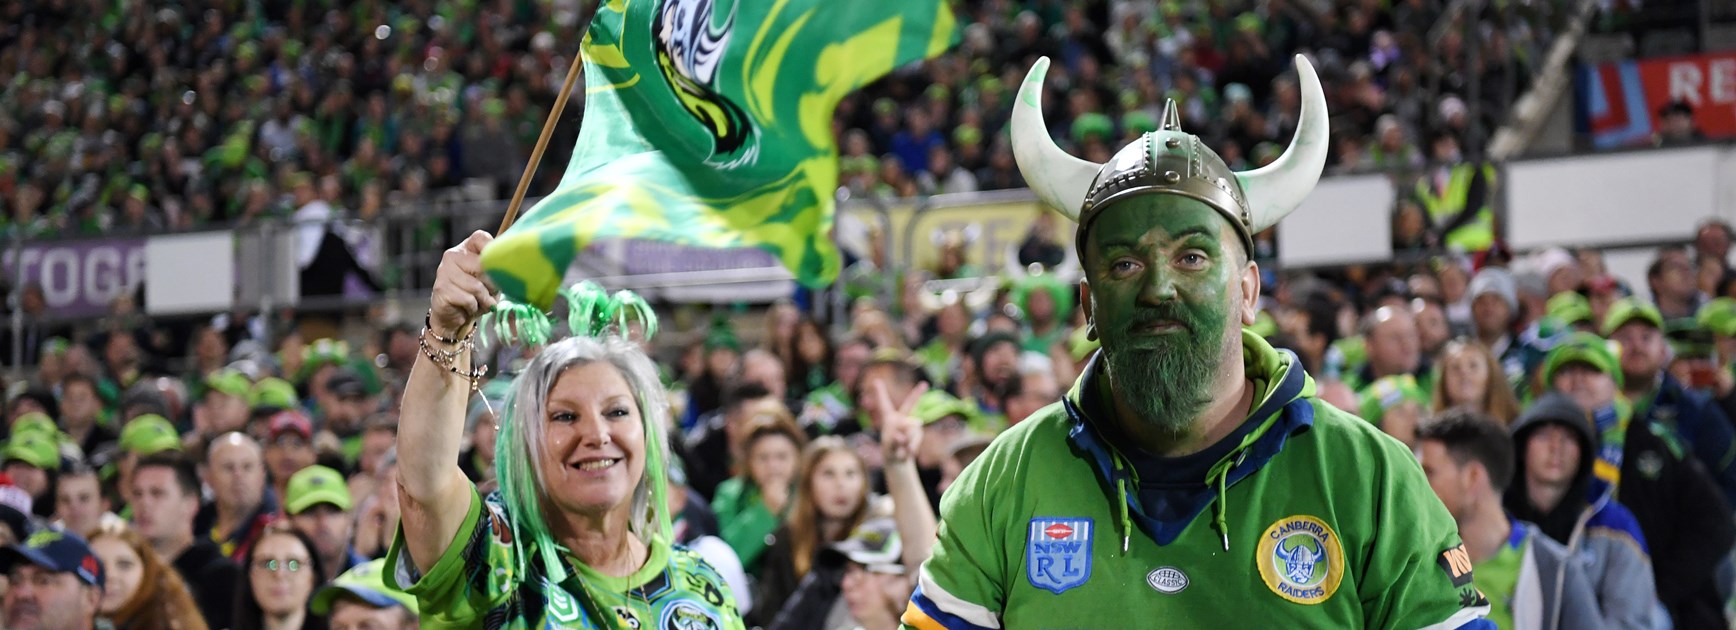 Raiders matches named Best Entertainment in Canberra!